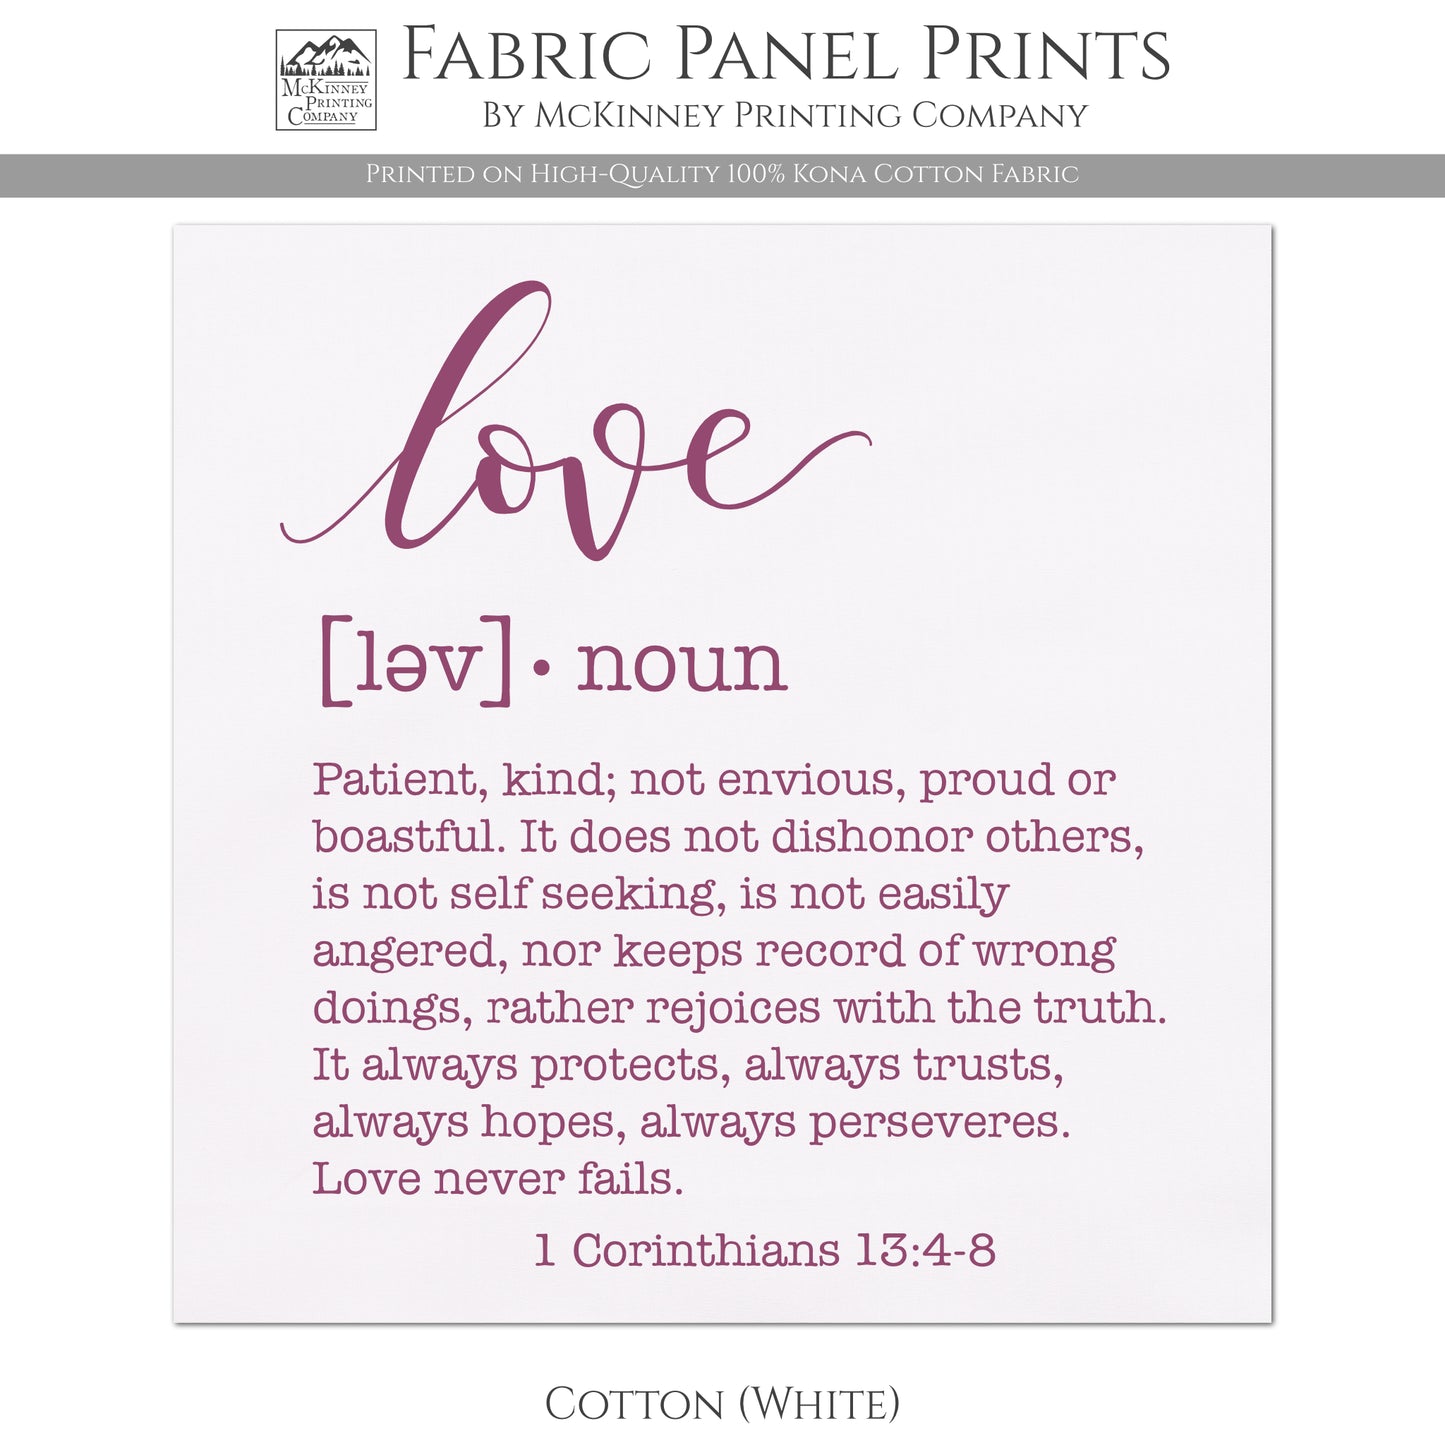 Love Fabric, Patient, kind, not envious, proud or boastful. It does not dishonor others, is not self seeking, is not easily angered, nor keeps record of wrong doings, rather rejoices with the truth. It always protects, always trusts, always hopes, always perseveres. Love never fails. - 1 Corinthians 13:4-8 - Cotton, White